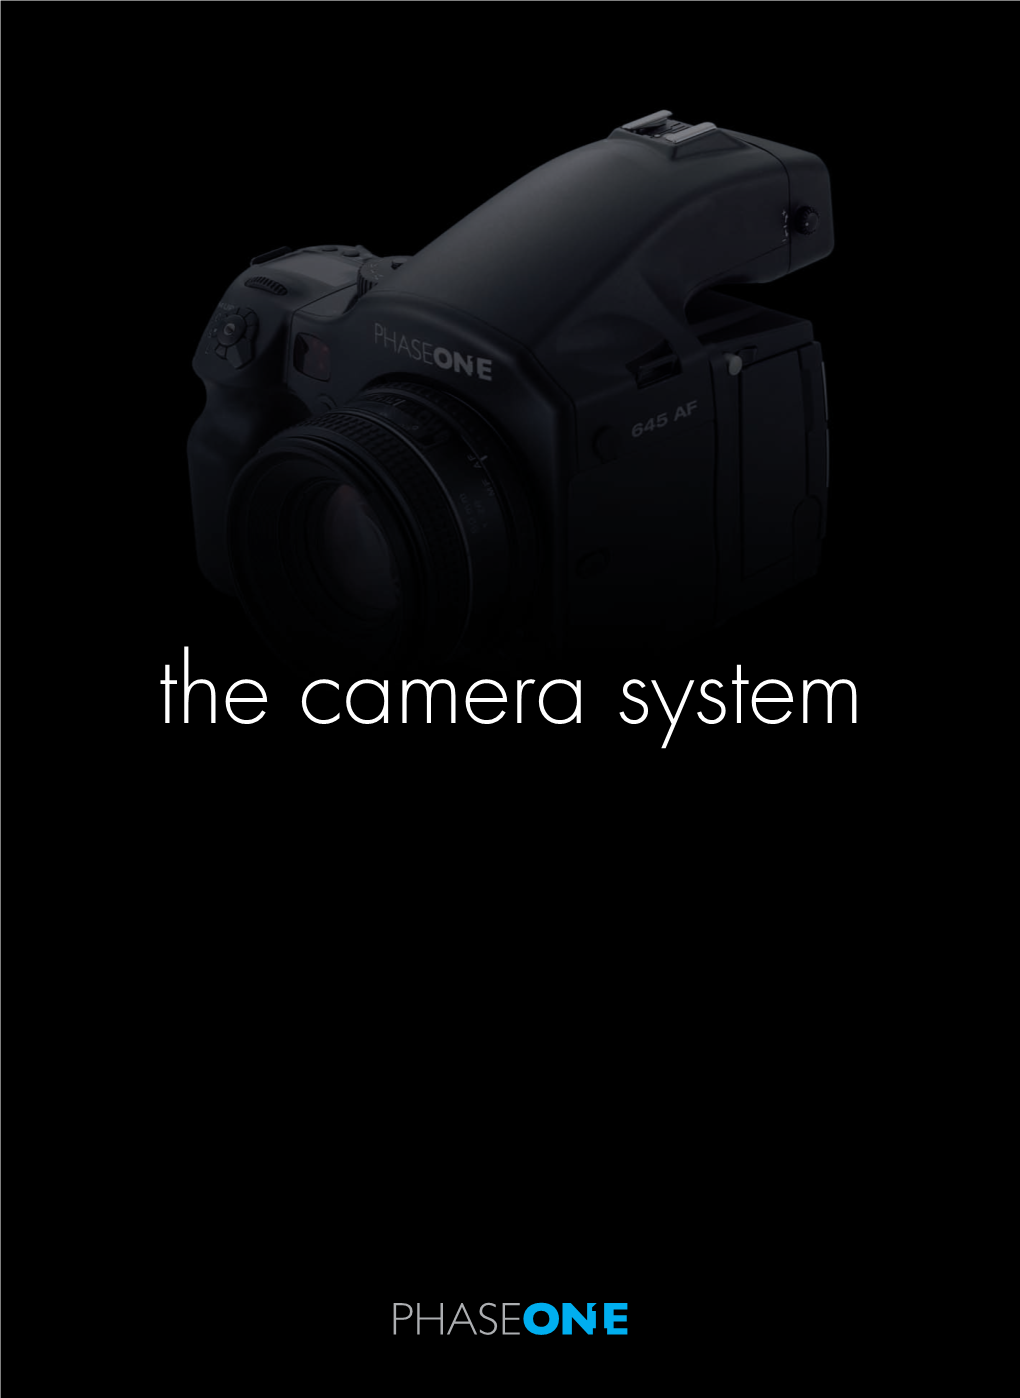 The Camera System